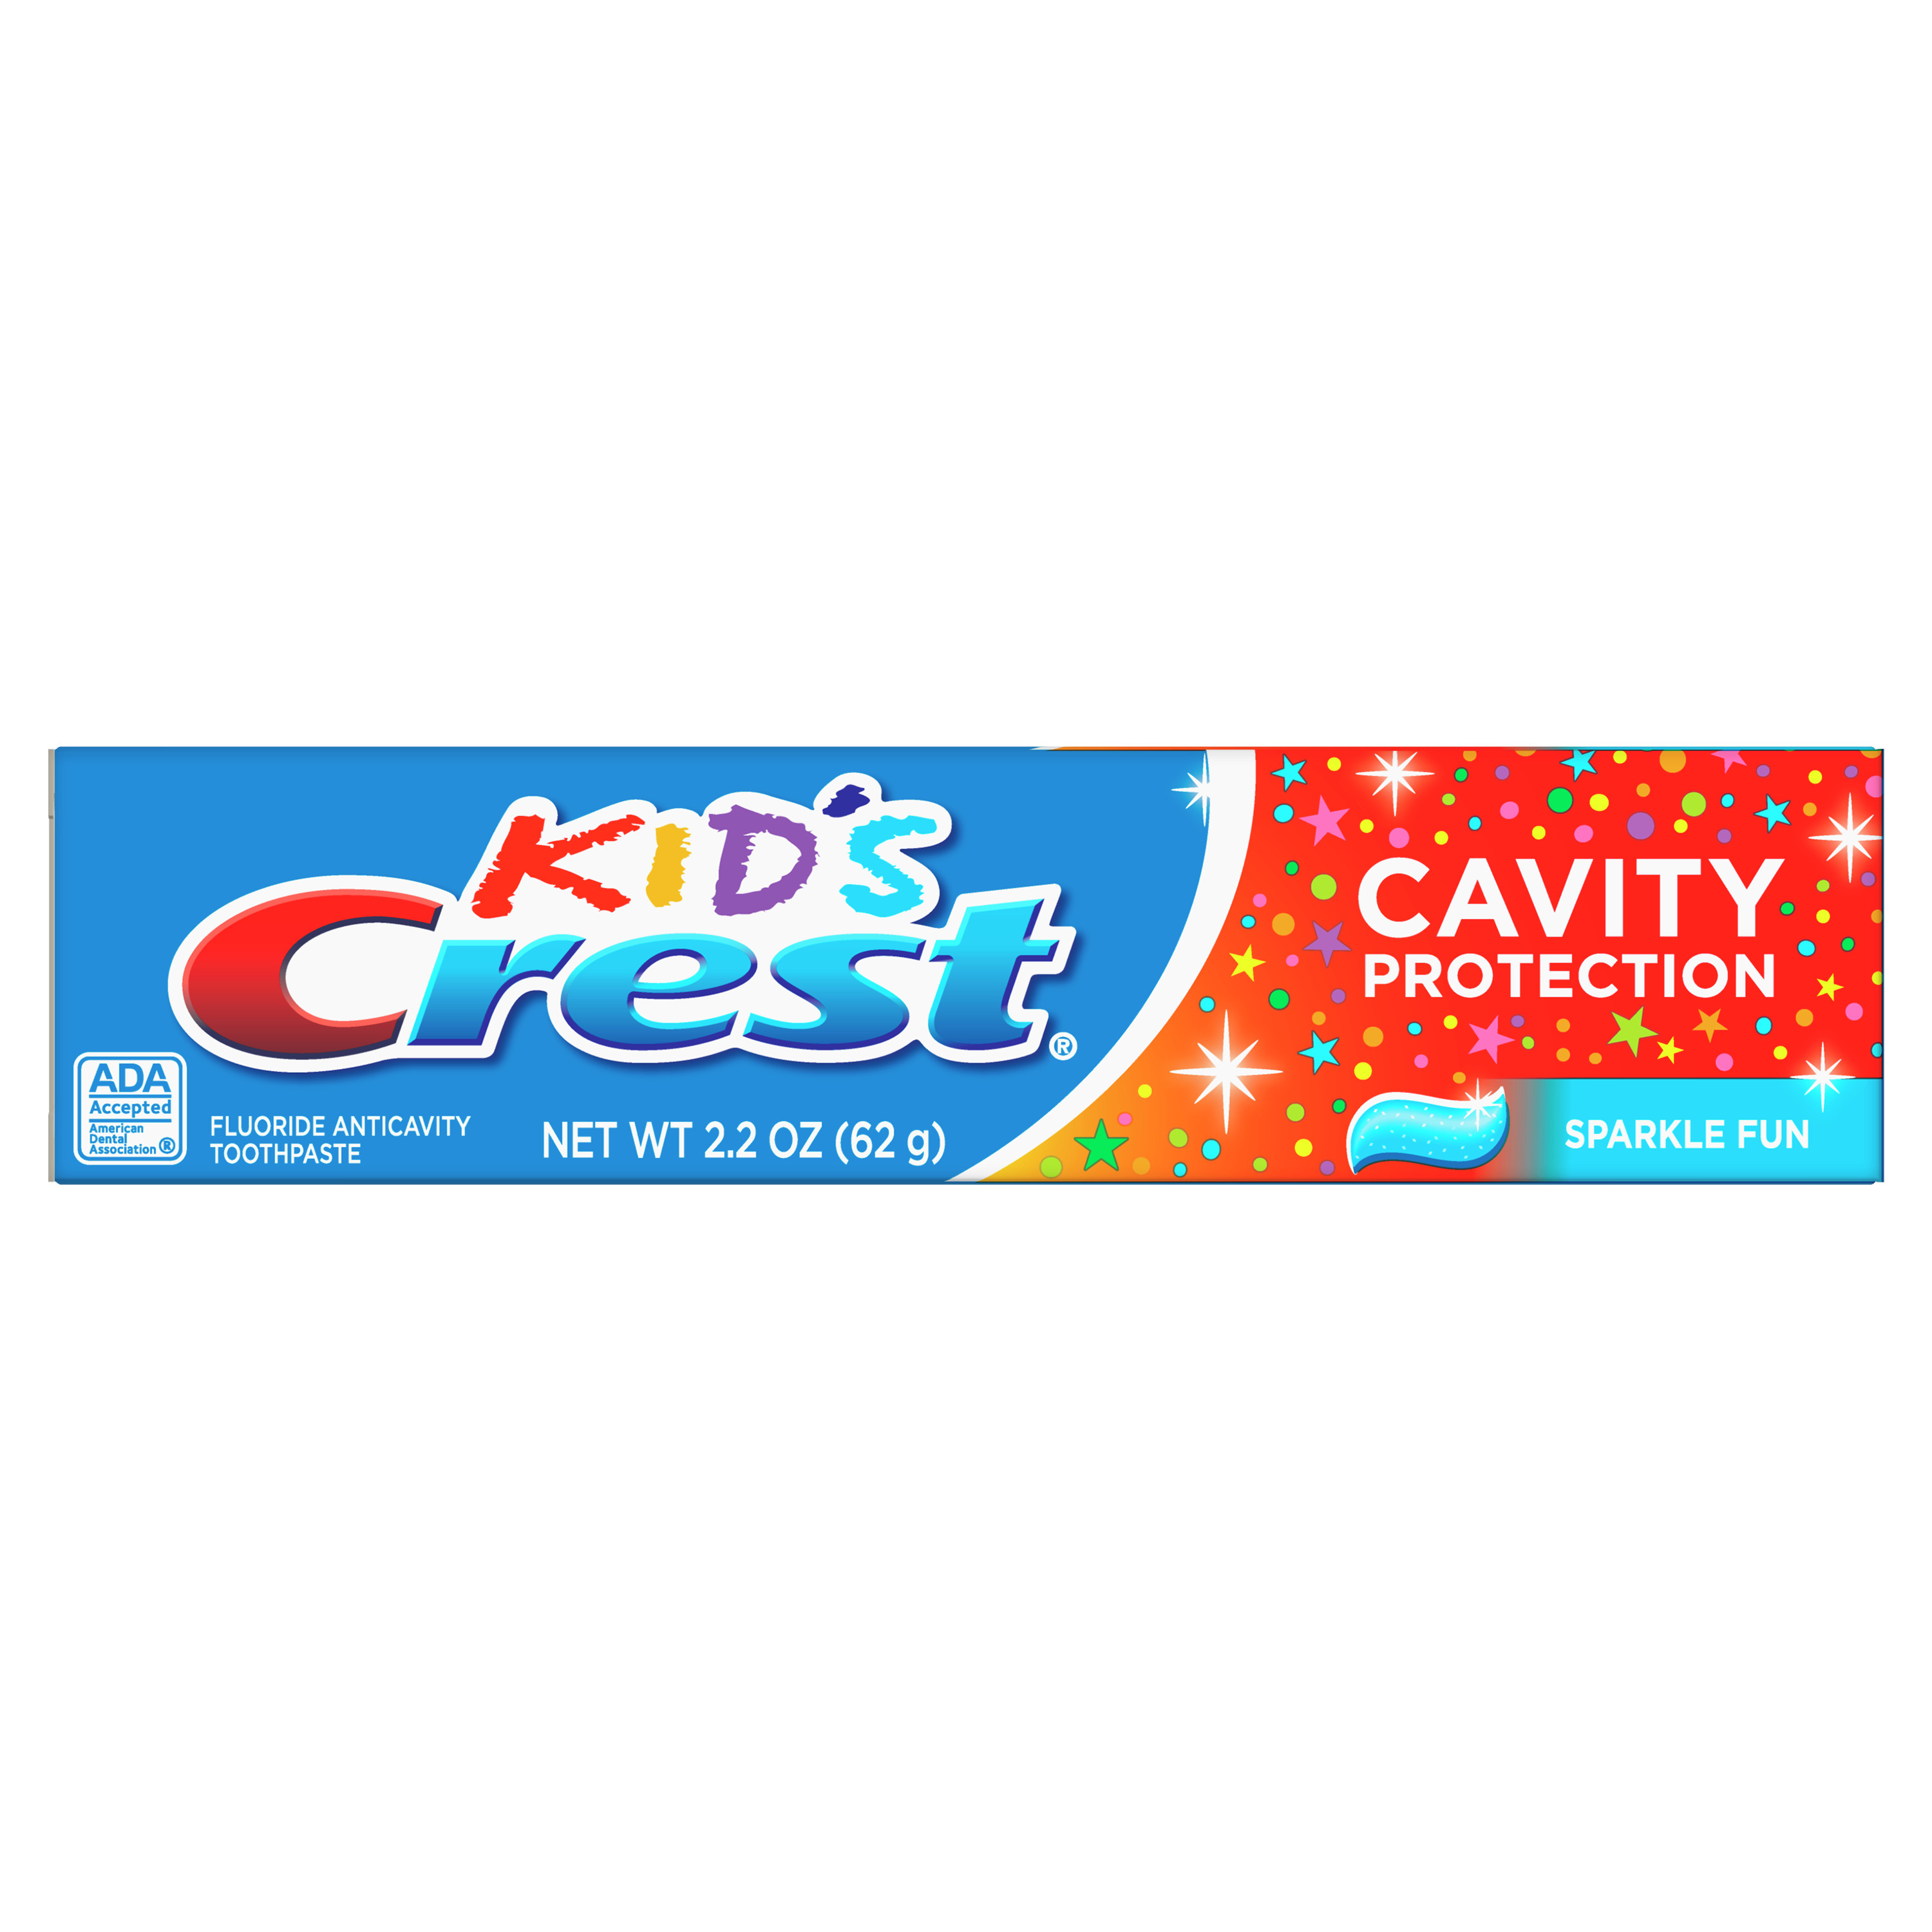 Crest Kid's Cavity Protection Toothpaste, Sparkle Fun, 2.2 oz - image 1 of 7